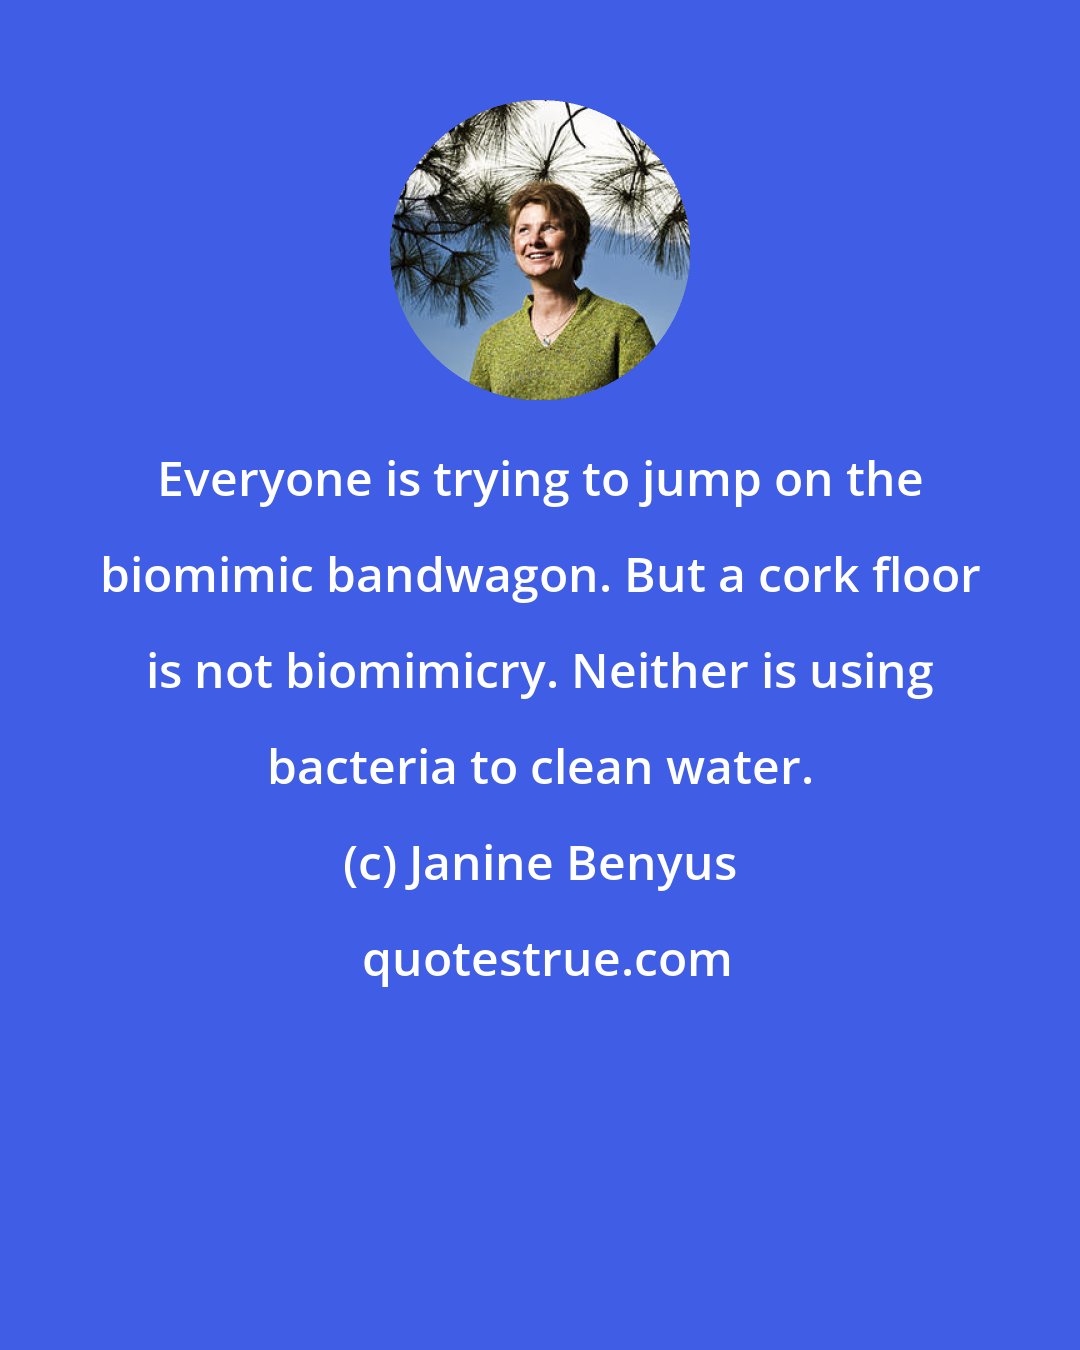 Janine Benyus: Everyone is trying to jump on the biomimic bandwagon. But a cork floor is not biomimicry. Neither is using bacteria to clean water.